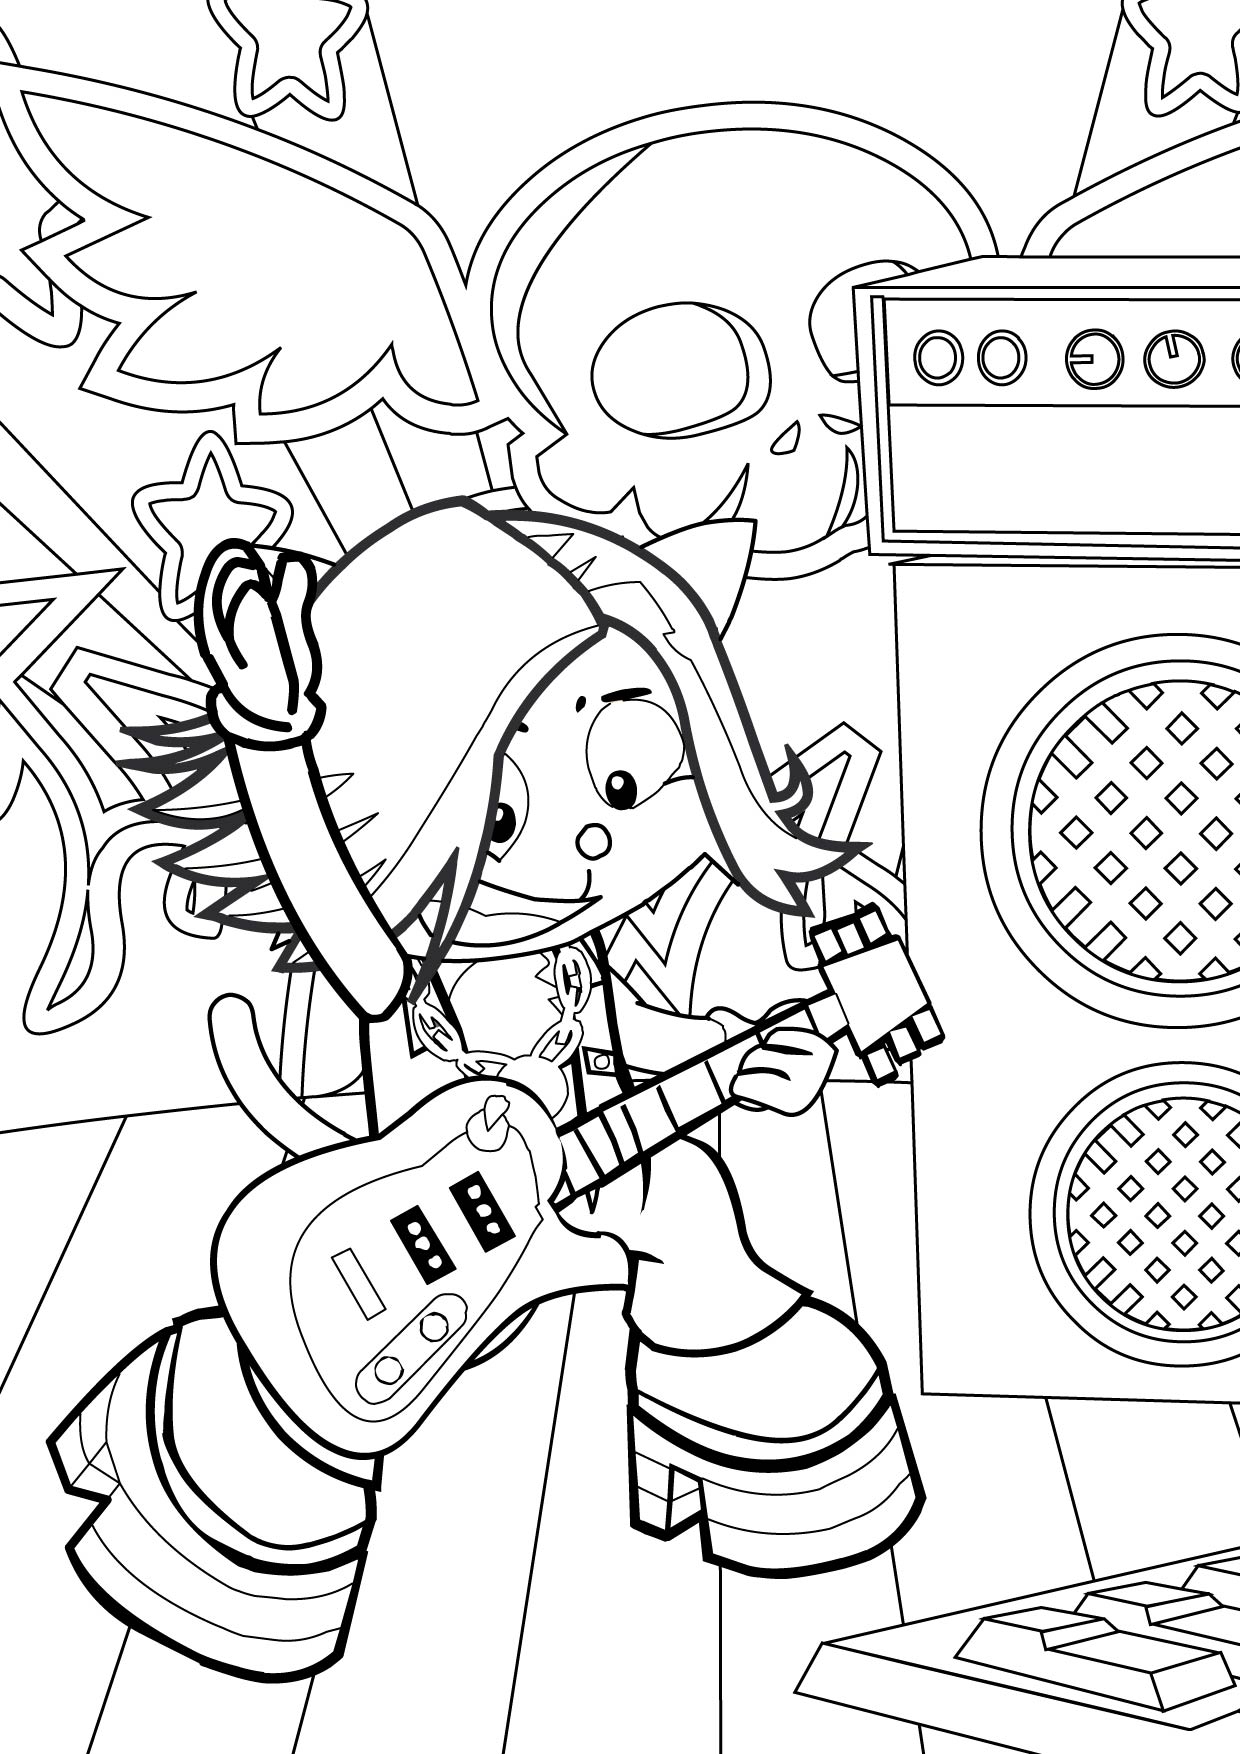 Classic Rock Adult Coloring Pages Coloring Pages